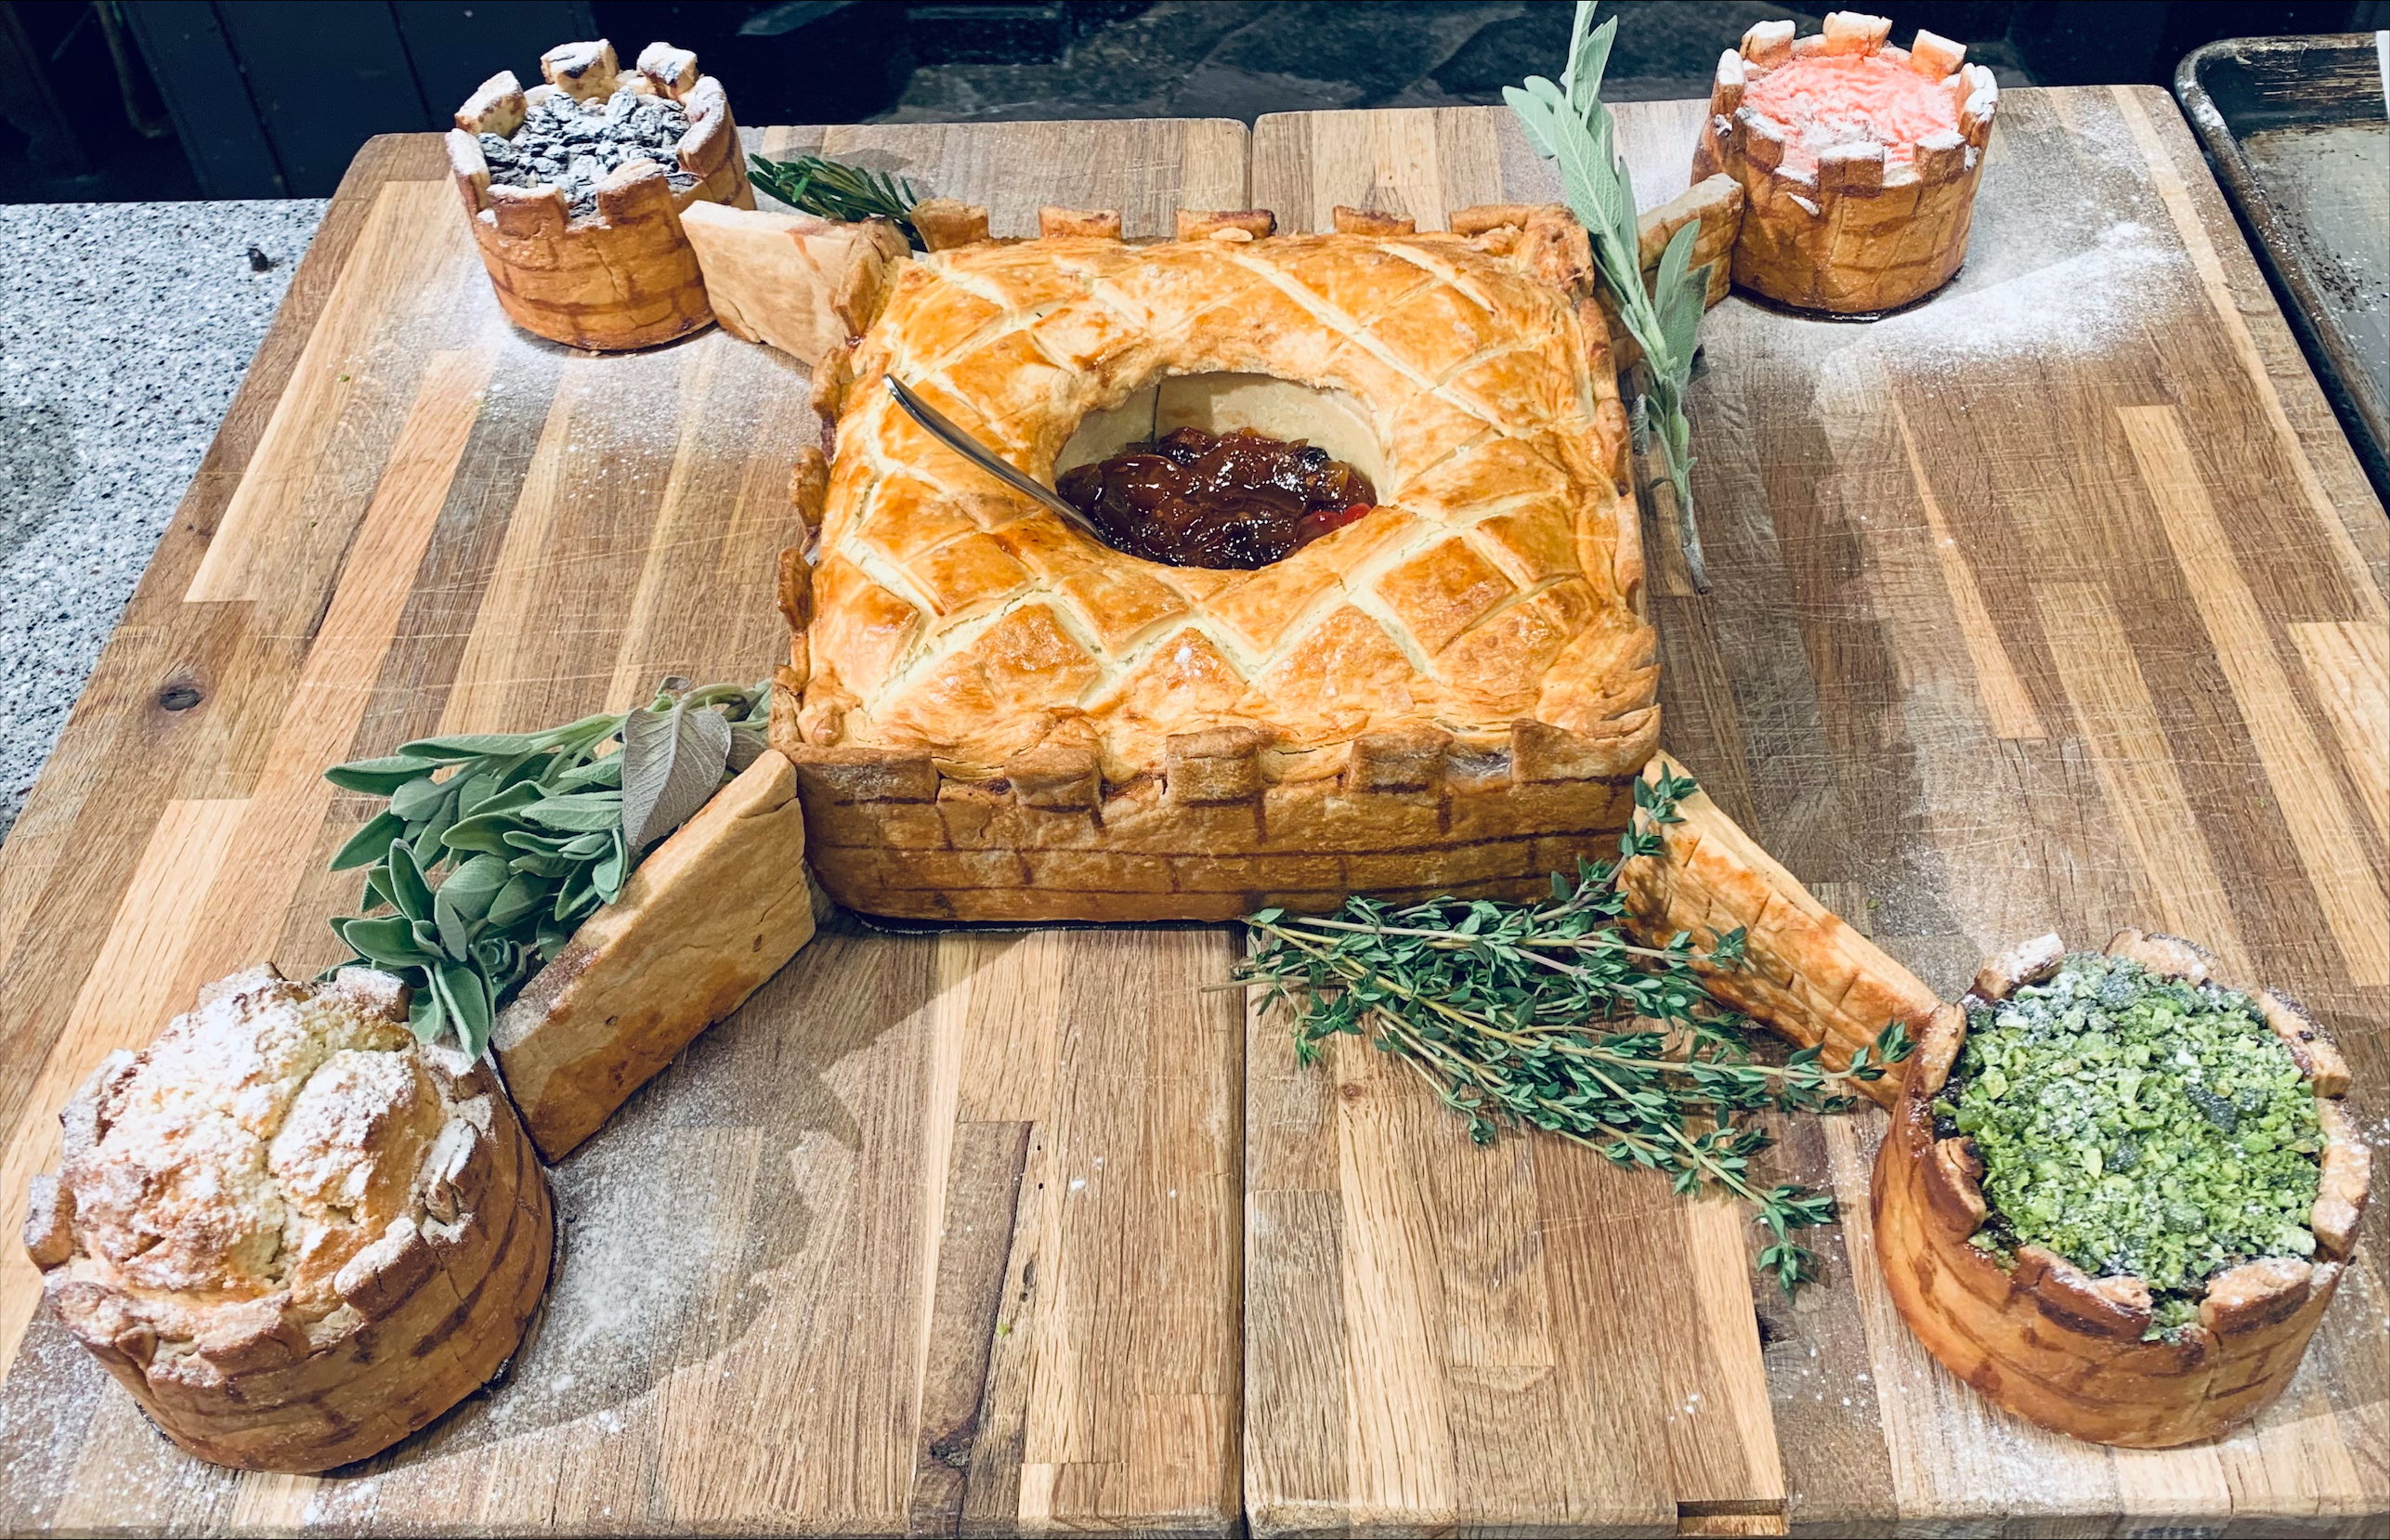 A pie in the shape of a castle